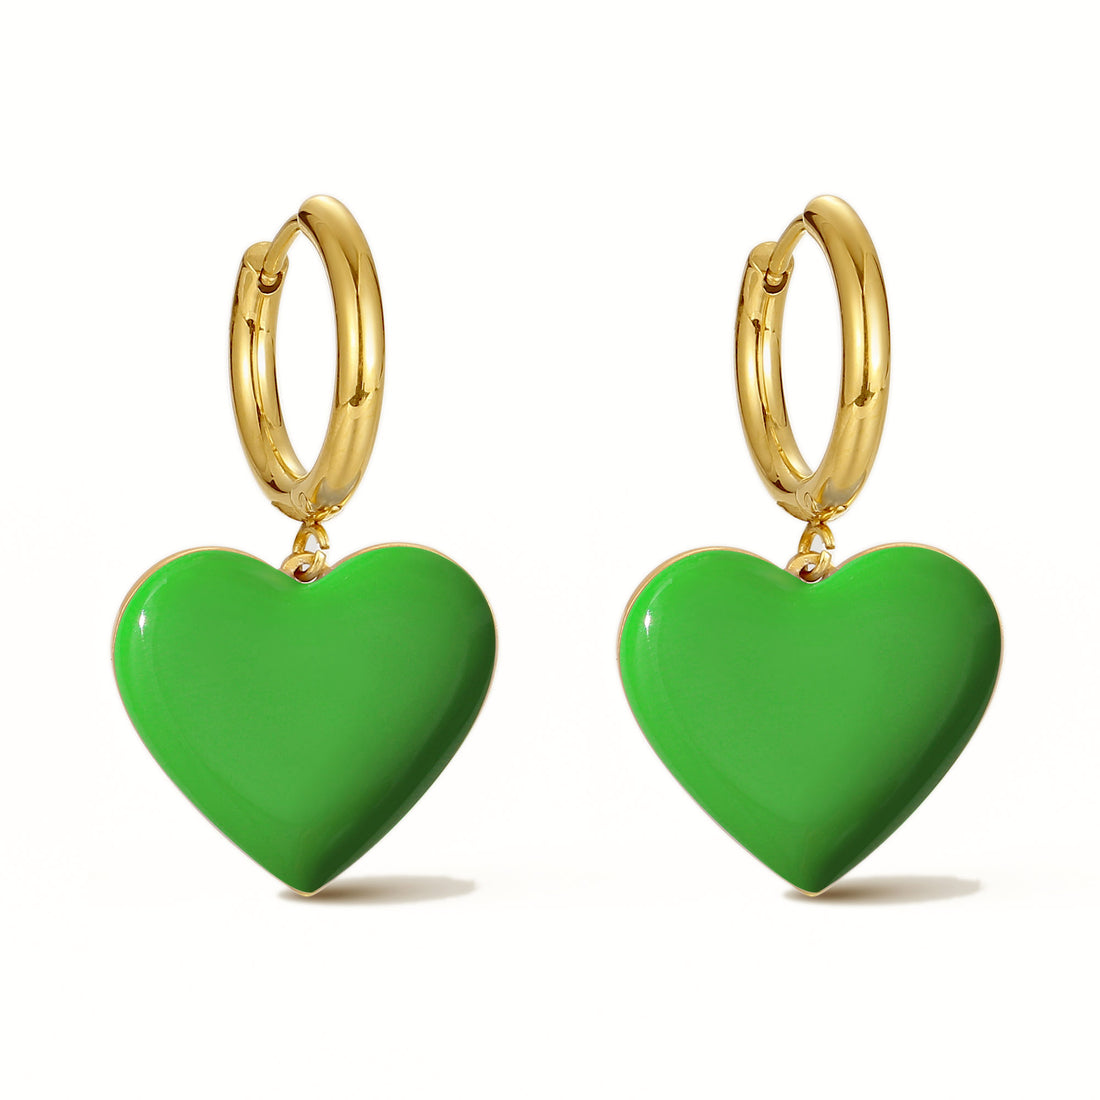 Hold Your Heart / Hoops • Black & Green